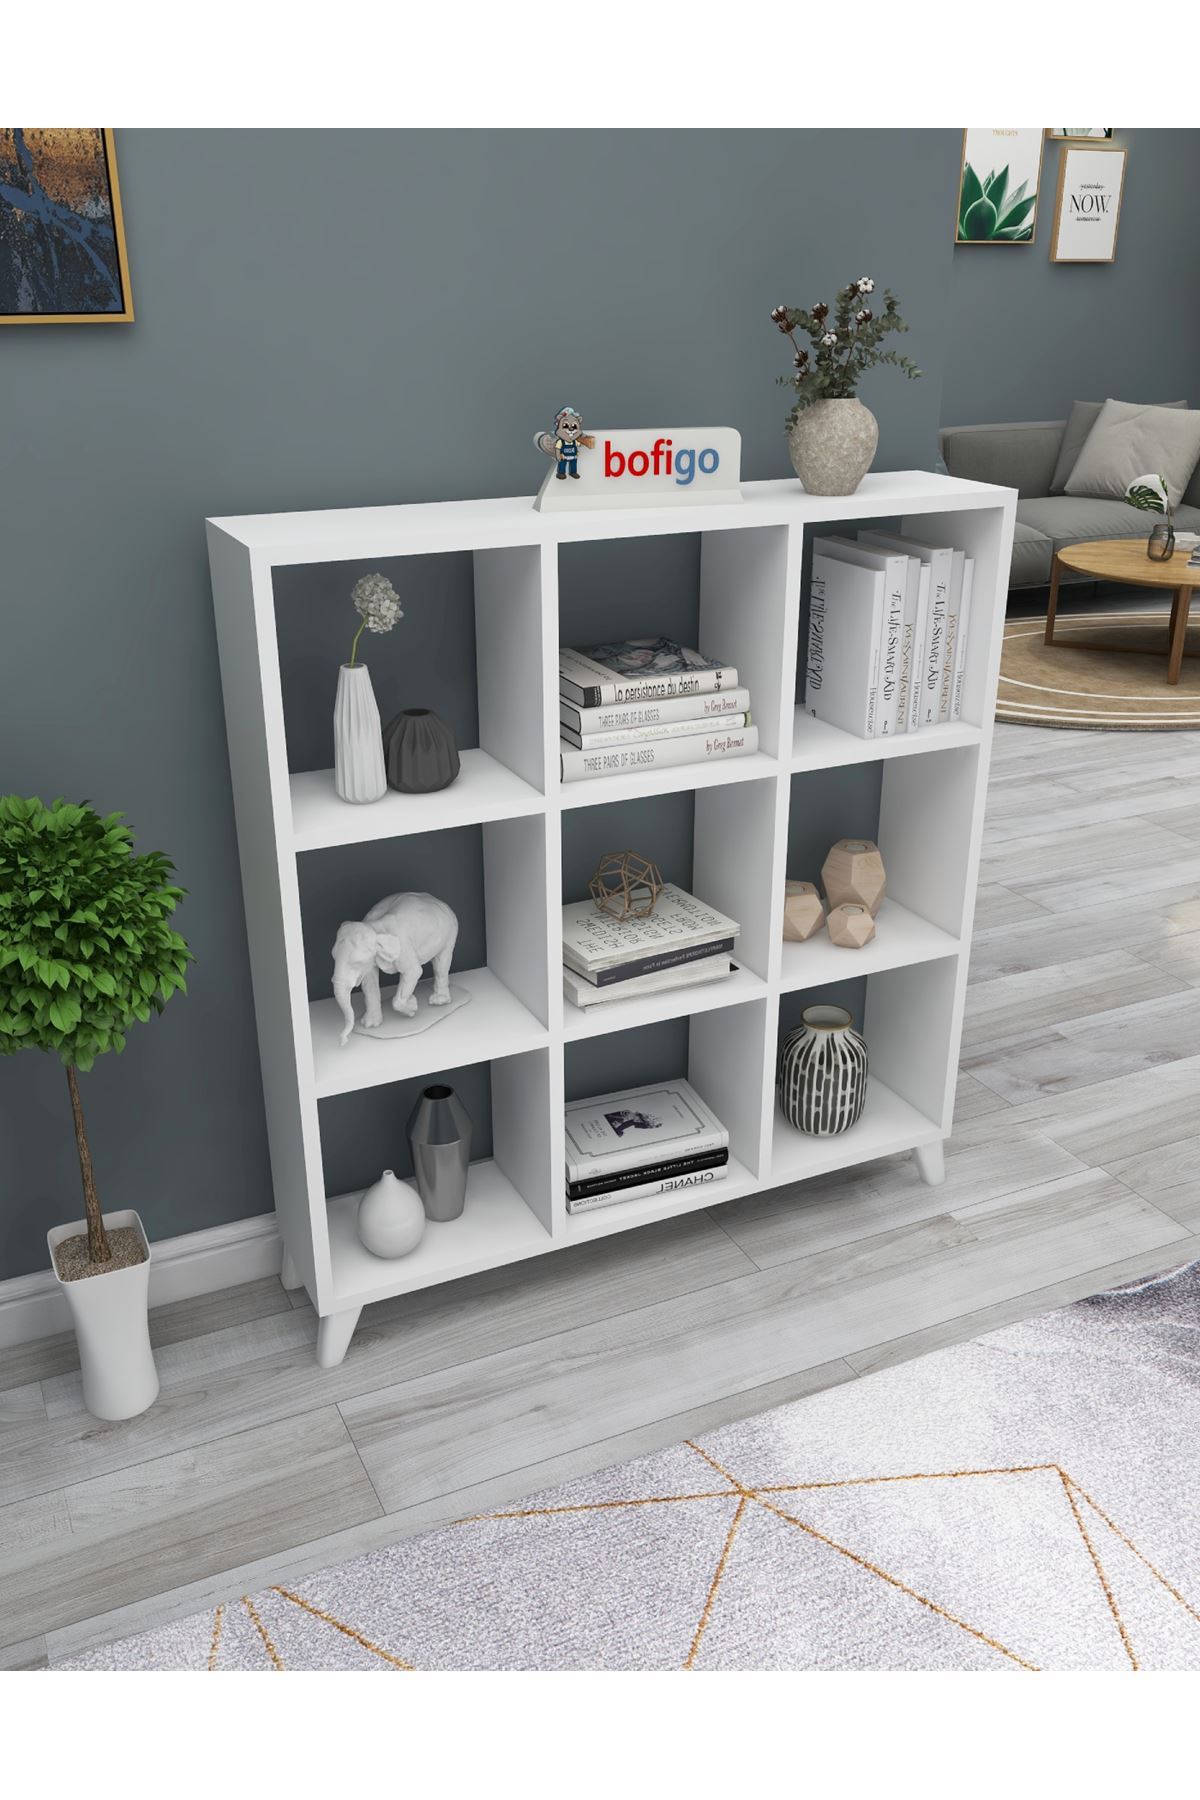 Bofigo Cube Bookshelf with 9 Sections and Shelves Square Bookcase Library White